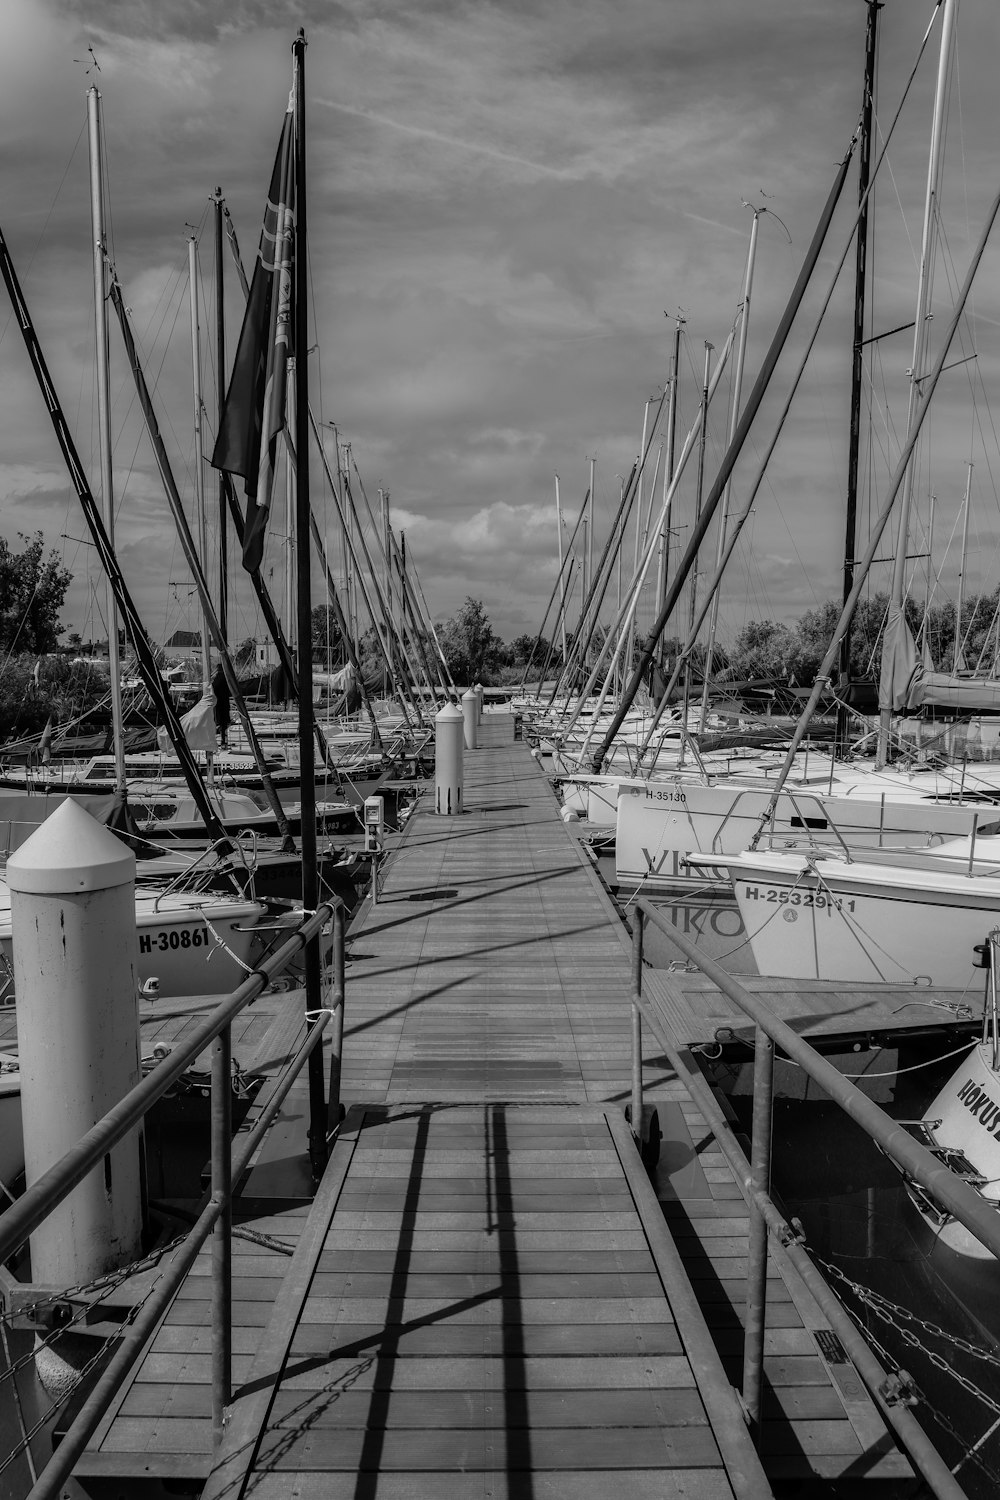 a black and white photo of boats docked at a pier